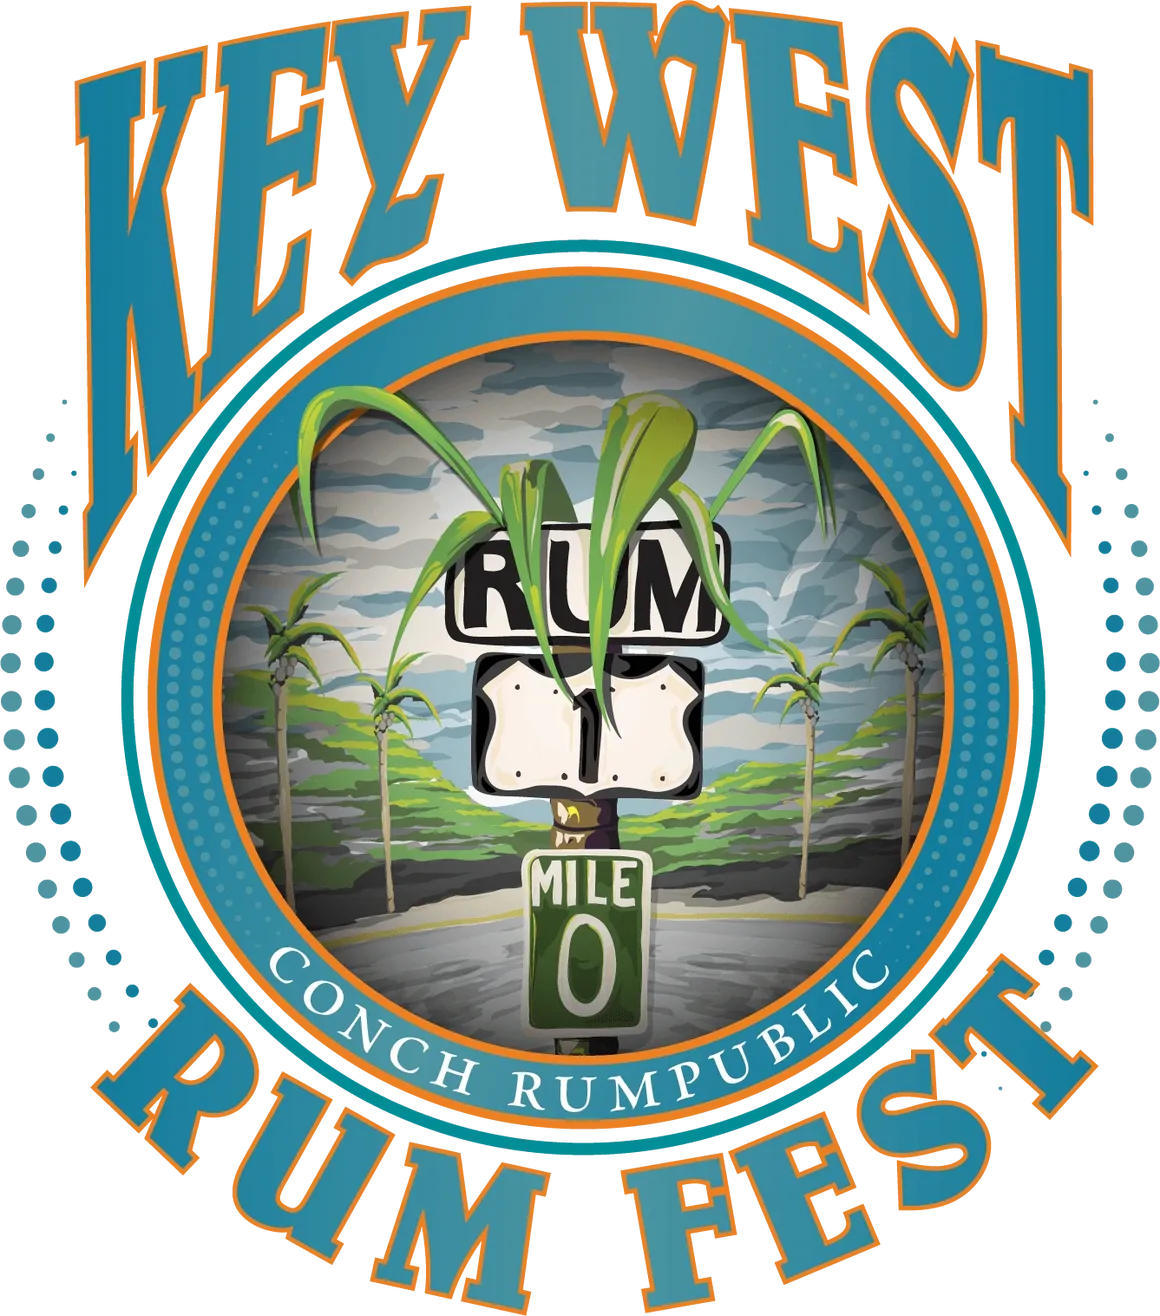 Episode 243 - The Key West 1st Annual Rum Fest